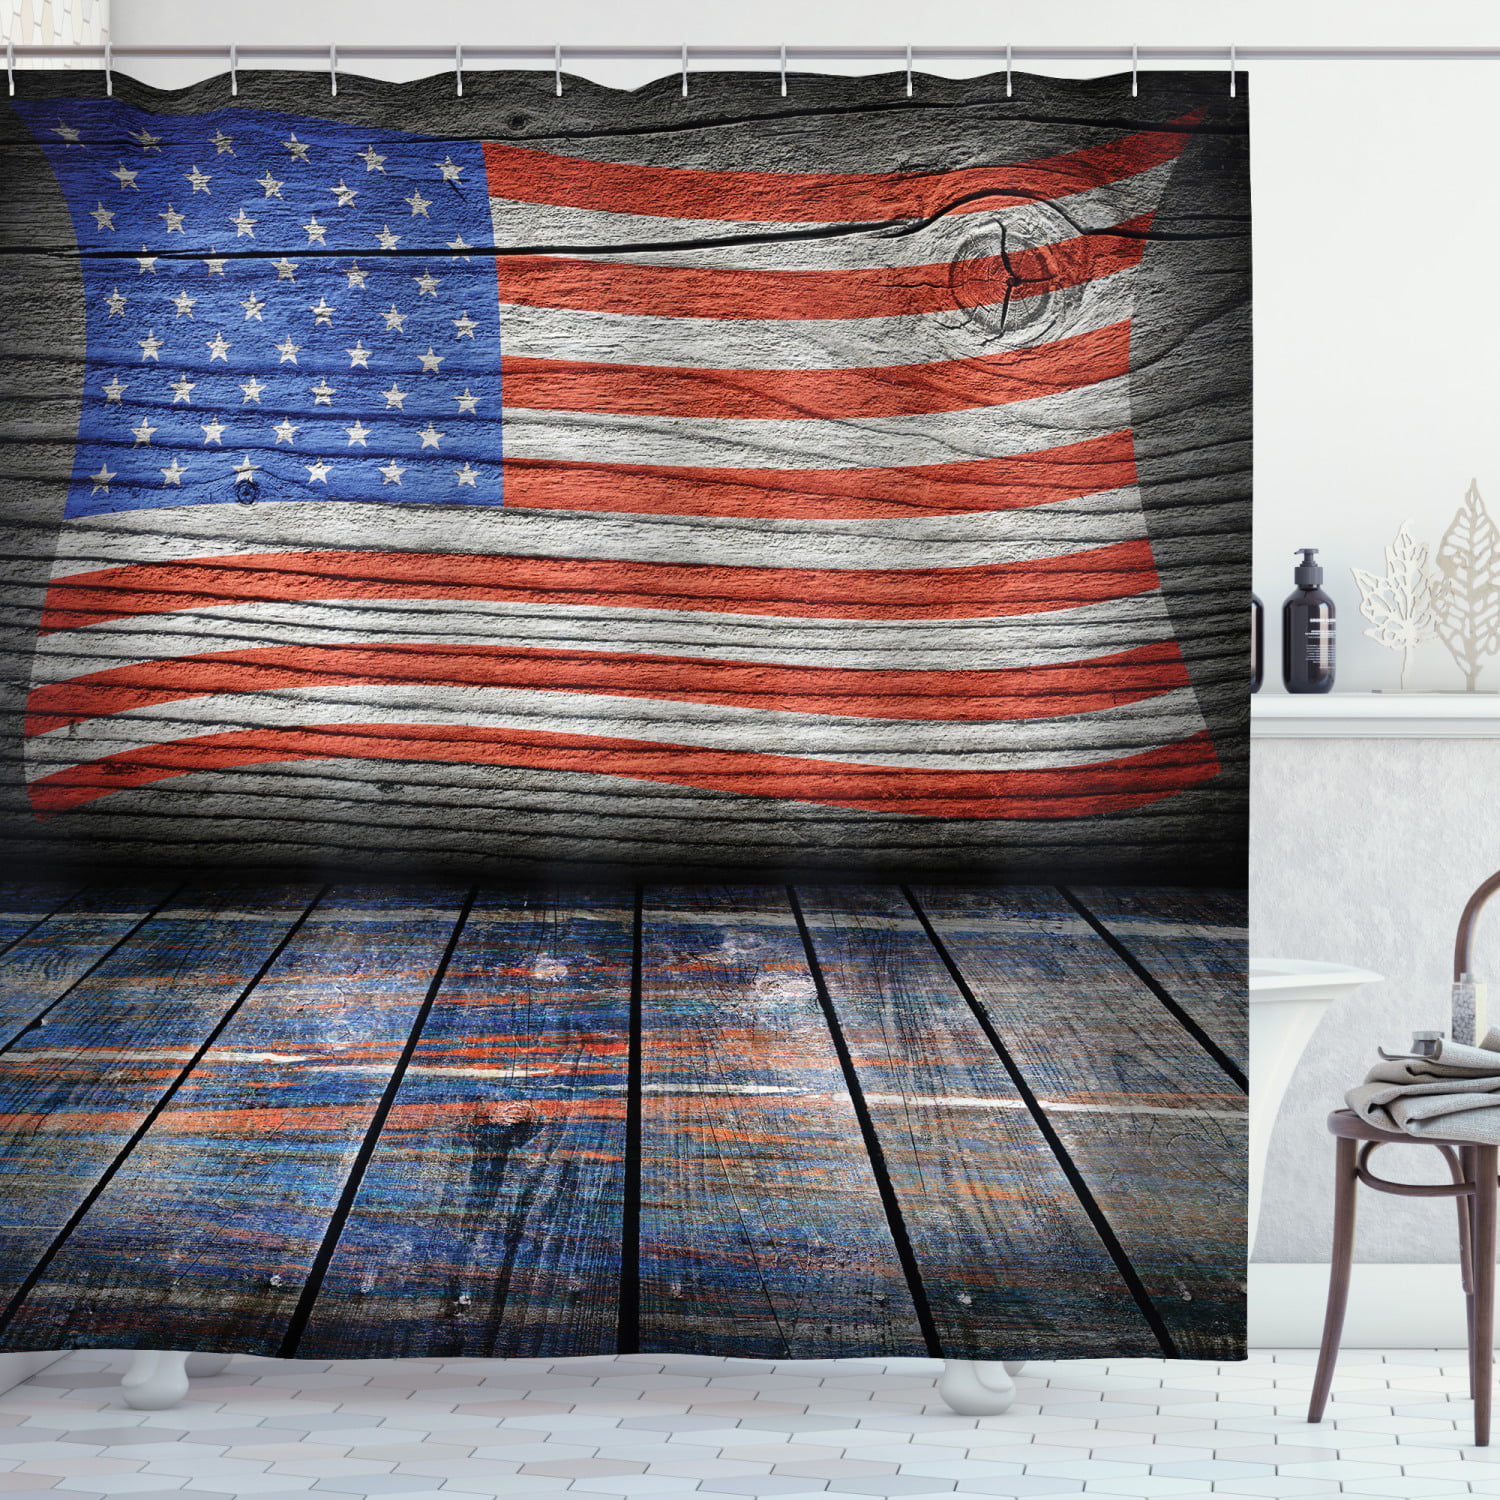 Details about   Retro American Flag Fabric Shower Curtain Bathroom Waterproof Accessories 71in 